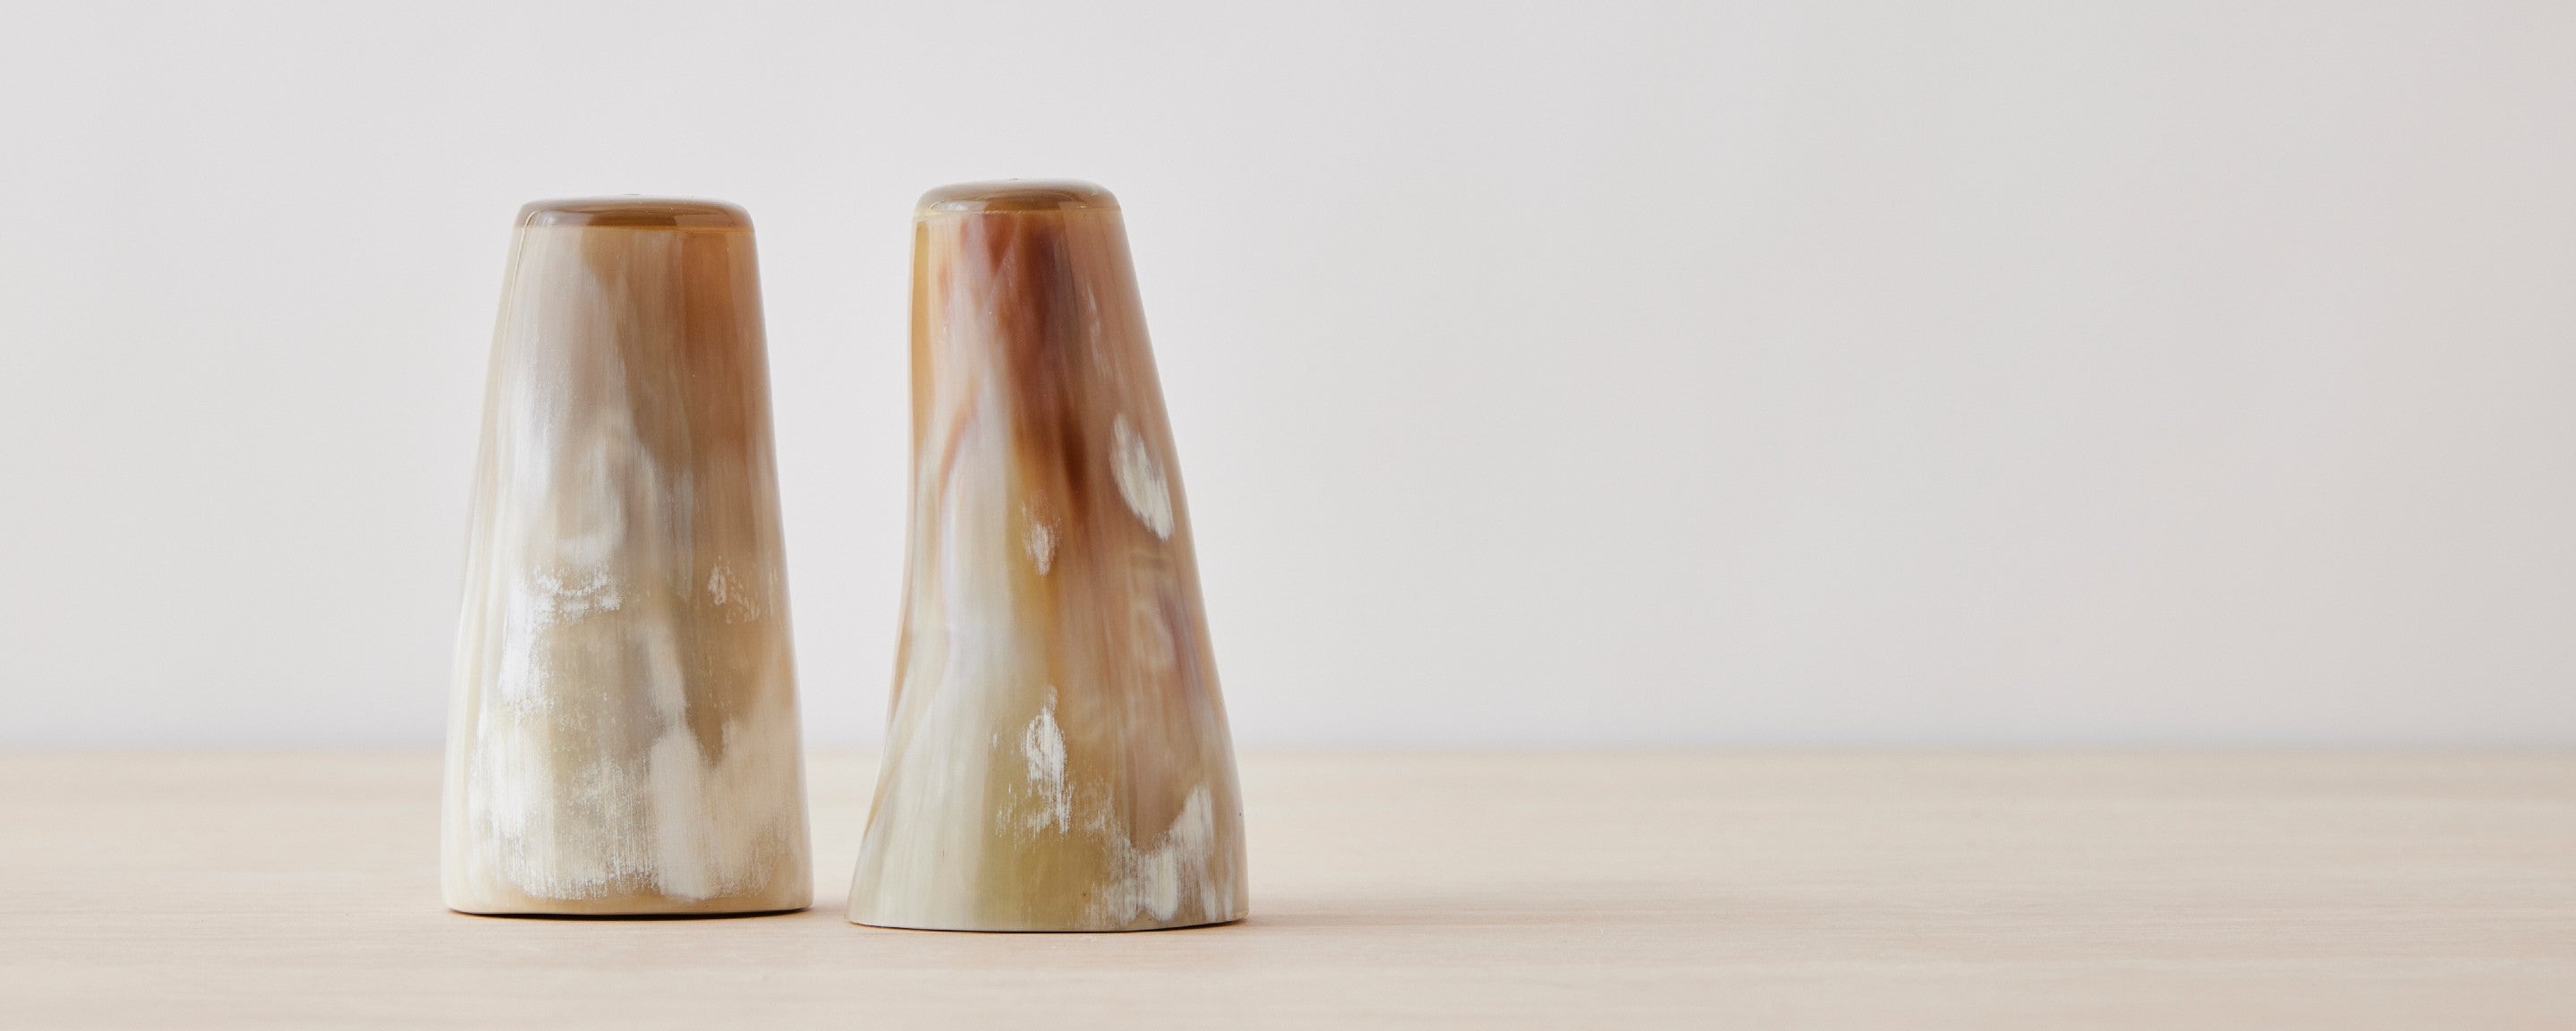 tall horn salt and pepper shakers